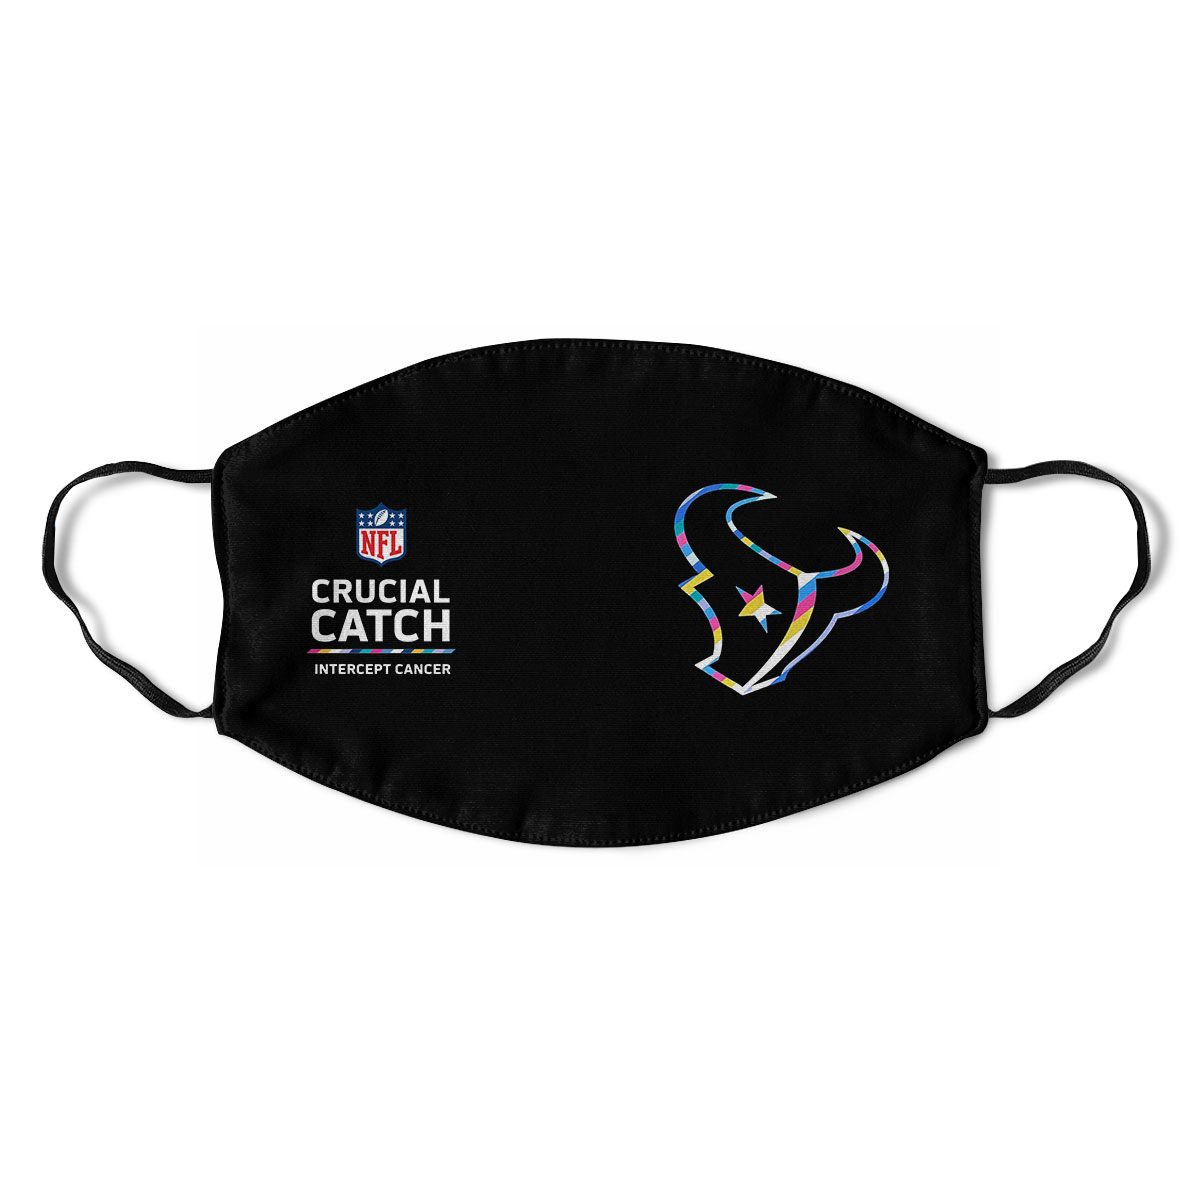 Green Bay Packers Nfl Crucial Catch Multicolor Face Mask Cloth Reusable